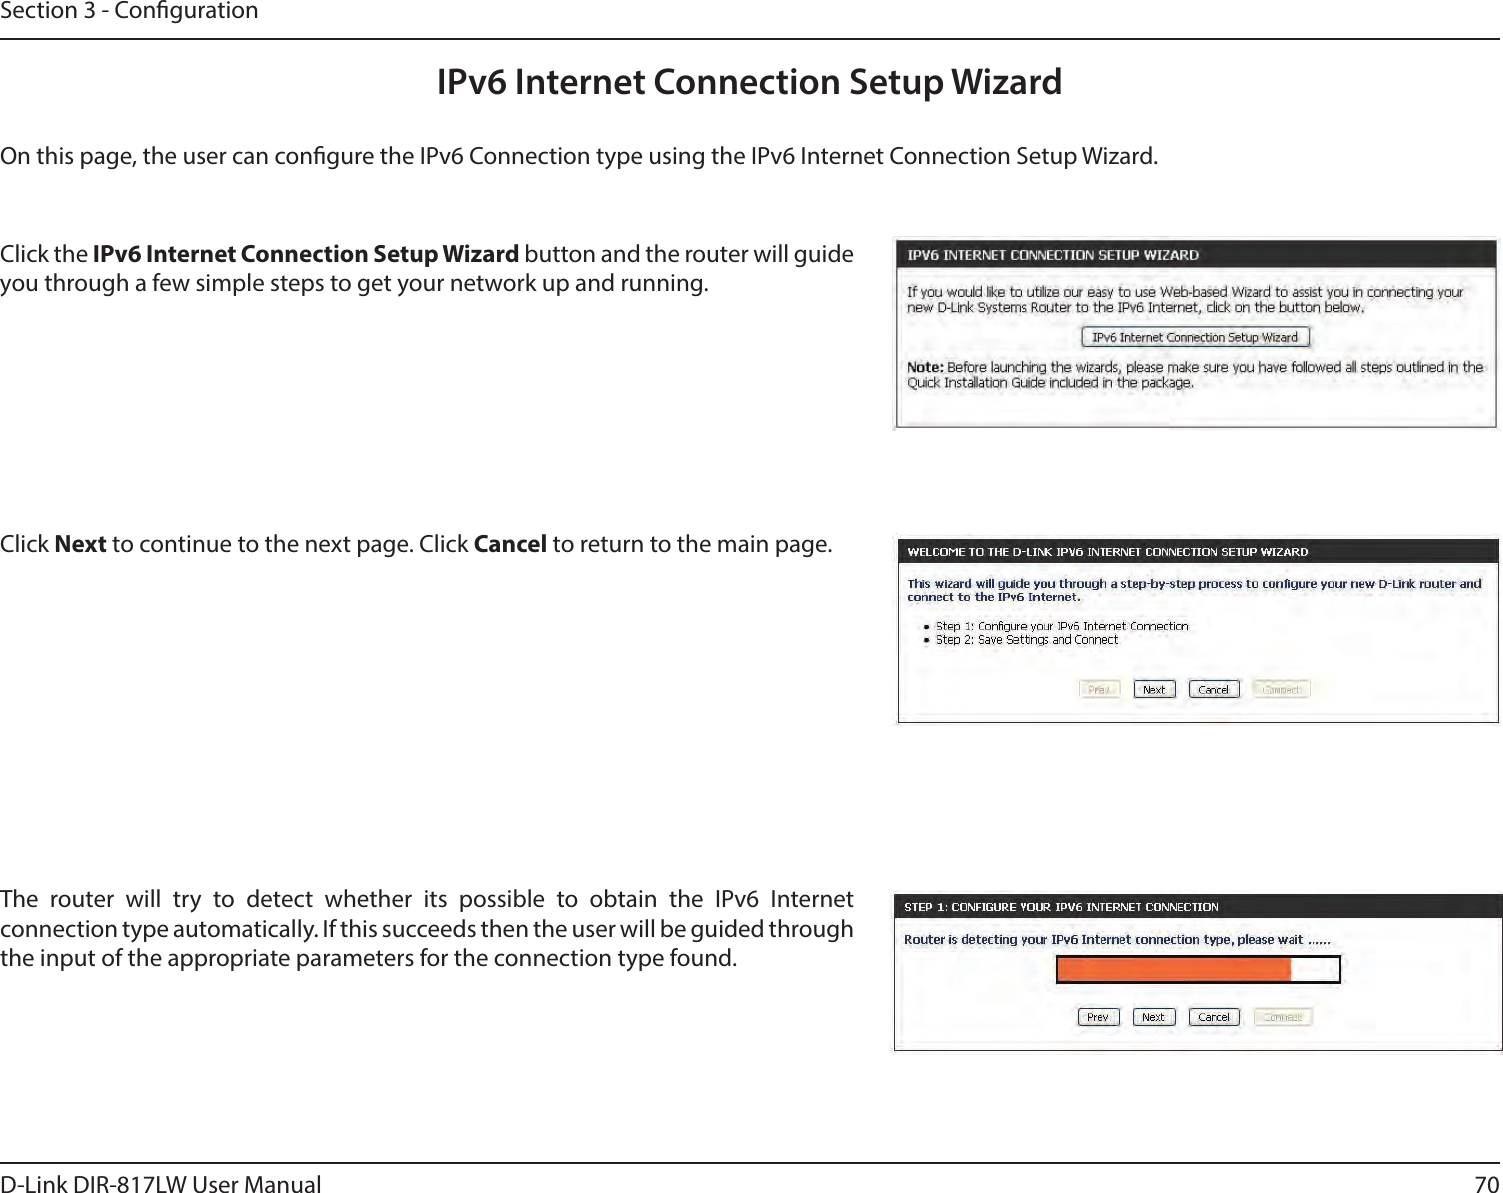 70D-Link DIR-817LW User ManualSection 3 - CongurationIPv6 Internet Connection Setup WizardOn this page, the user can congure the IPv6 Connection type using the IPv6 Internet Connection Setup Wizard.Click the IPv6 Internet Connection Setup Wizard button and the router will guide you through a few simple steps to get your network up and running.Click Next to continue to the next page. Click Cancel to return to the main page.The  router  will  try  to  detect  whether  its  possible  to  obtain  the  IPv6  Internet connection type automatically. If this succeeds then the user will be guided through the input of the appropriate parameters for the connection type found.